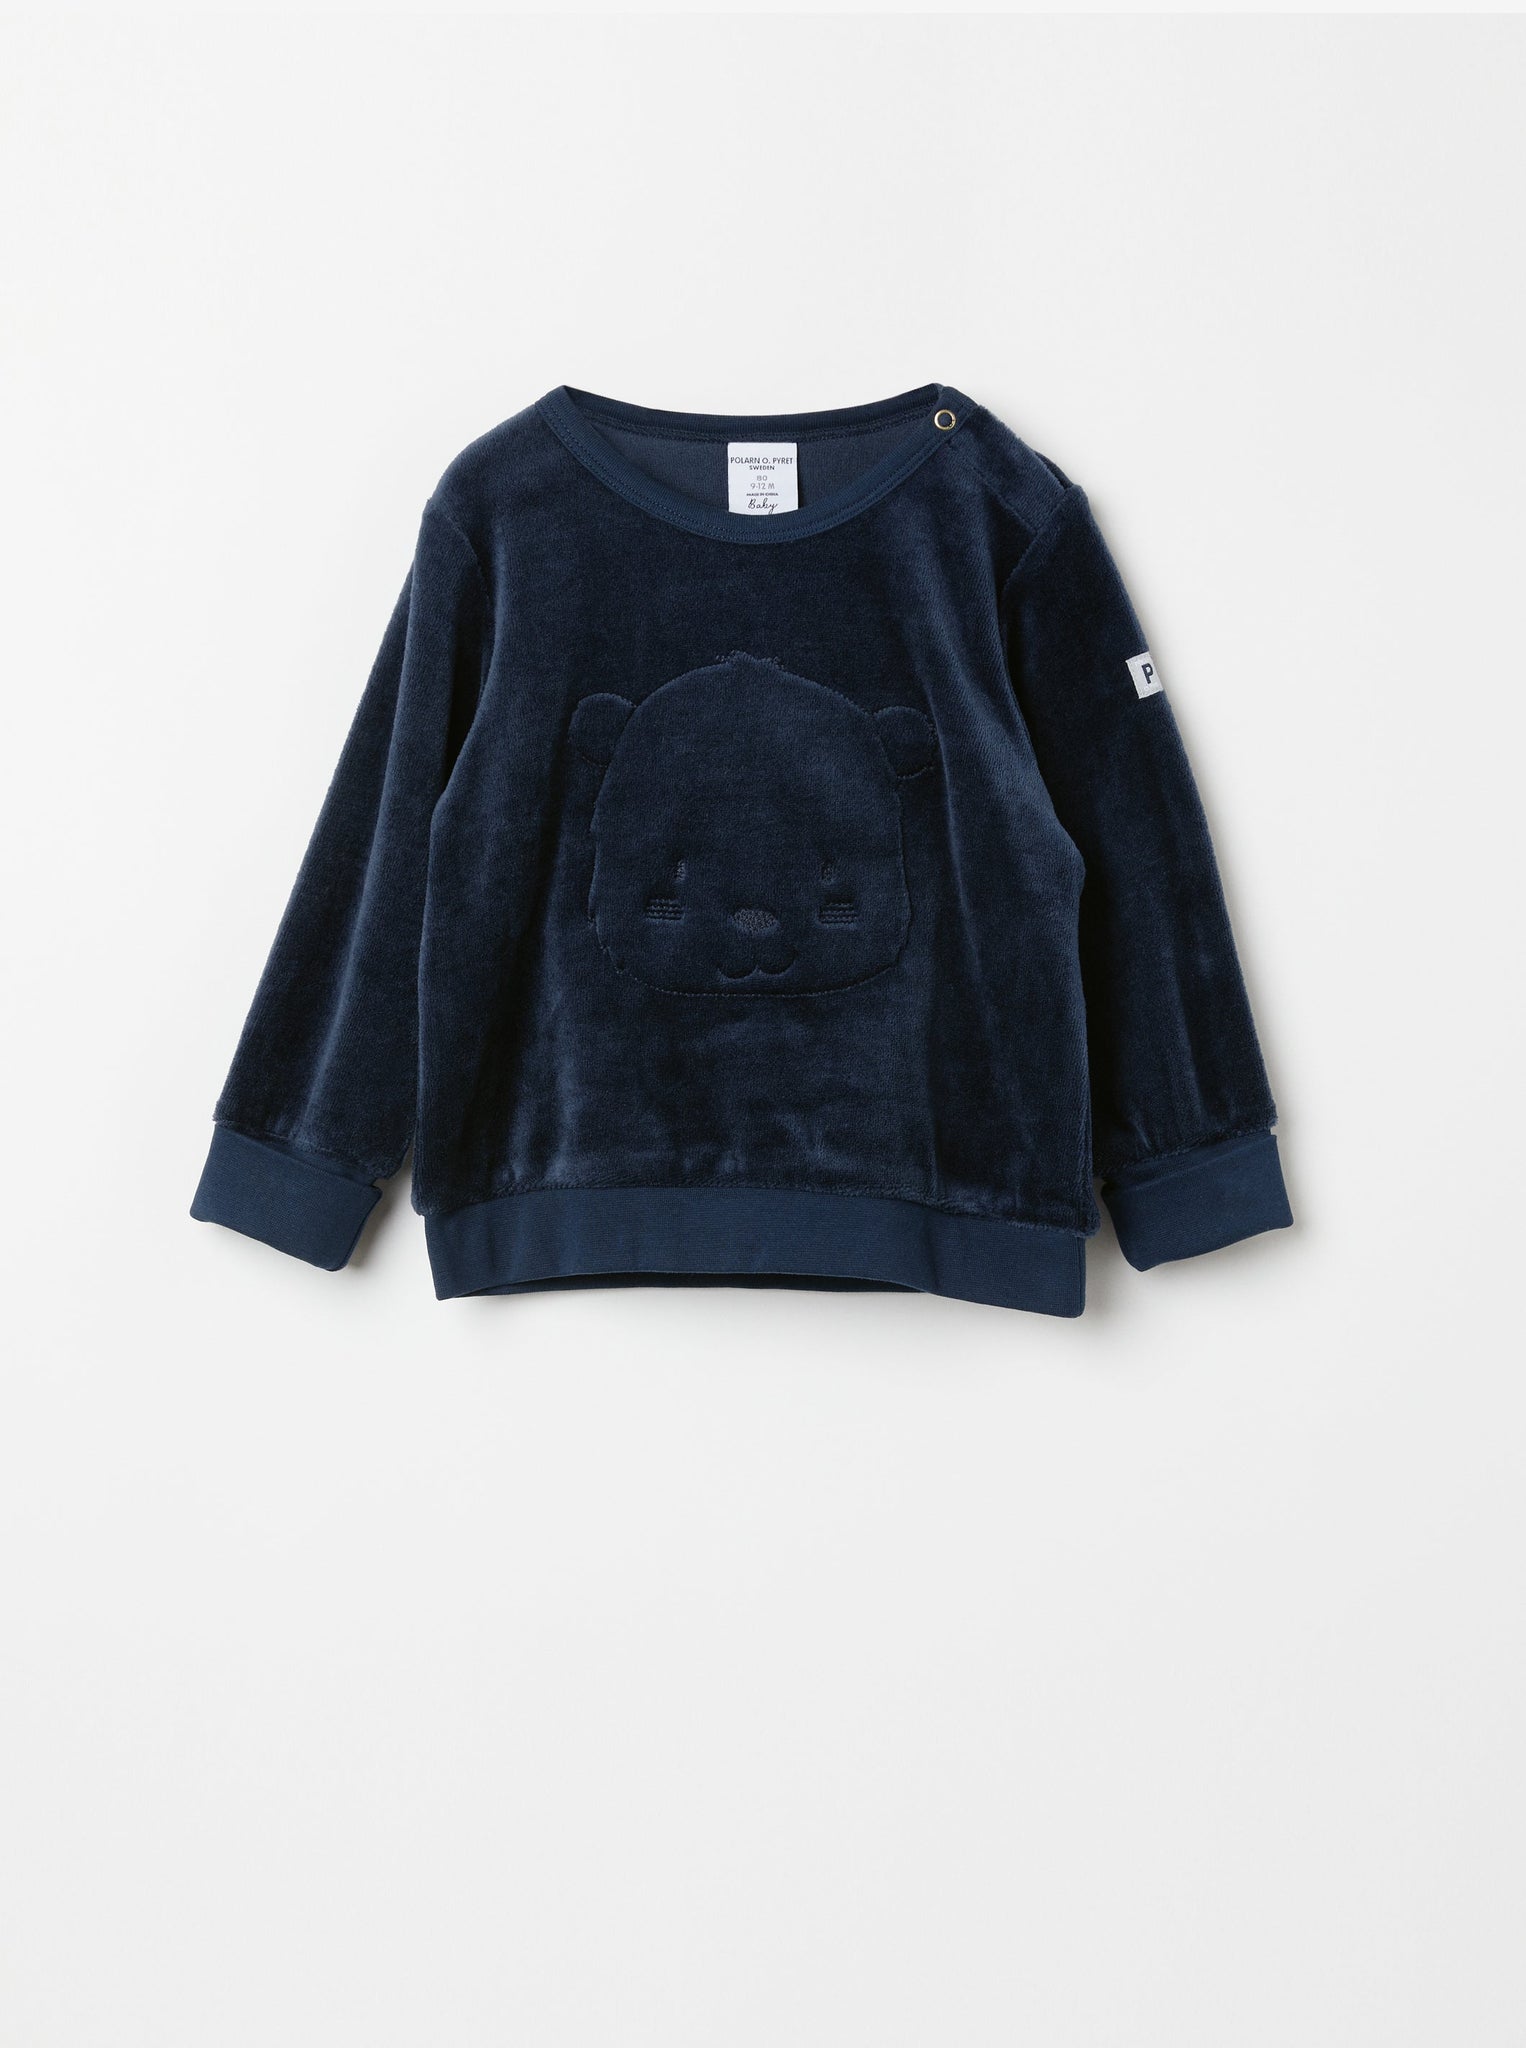 Navy Organic Cotton Velour Baby Top from the Polarn O. Pyret baby collection. Made using 100% GOTS Organic Cotton